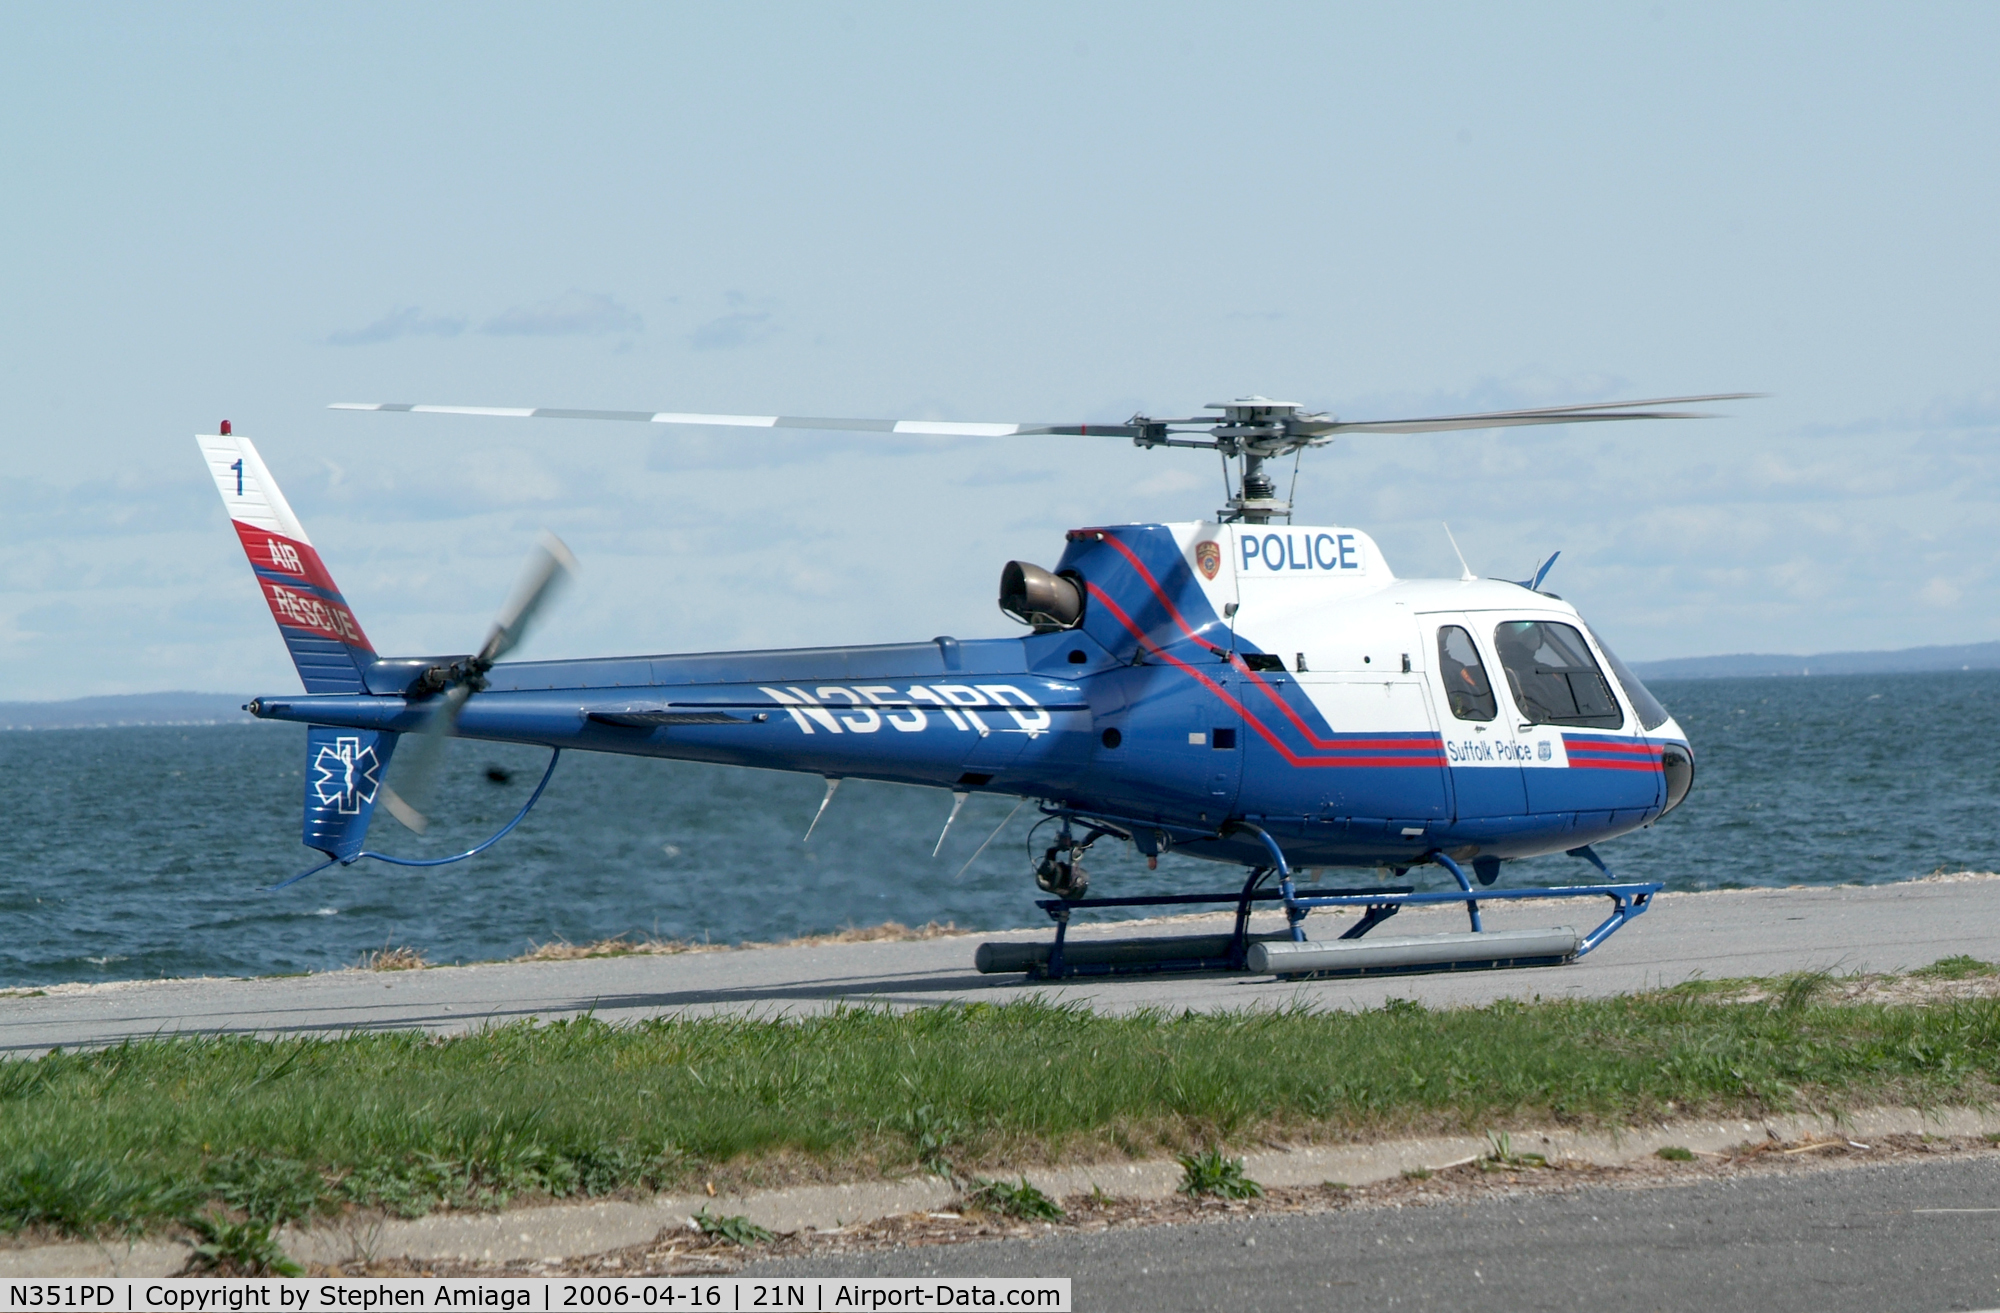 N351PD, 2000 Eurocopter AS-350B-2 Ecureuil C/N 3298, 351PD lands off-airport at Southold Town Beach for a Med-Evac...